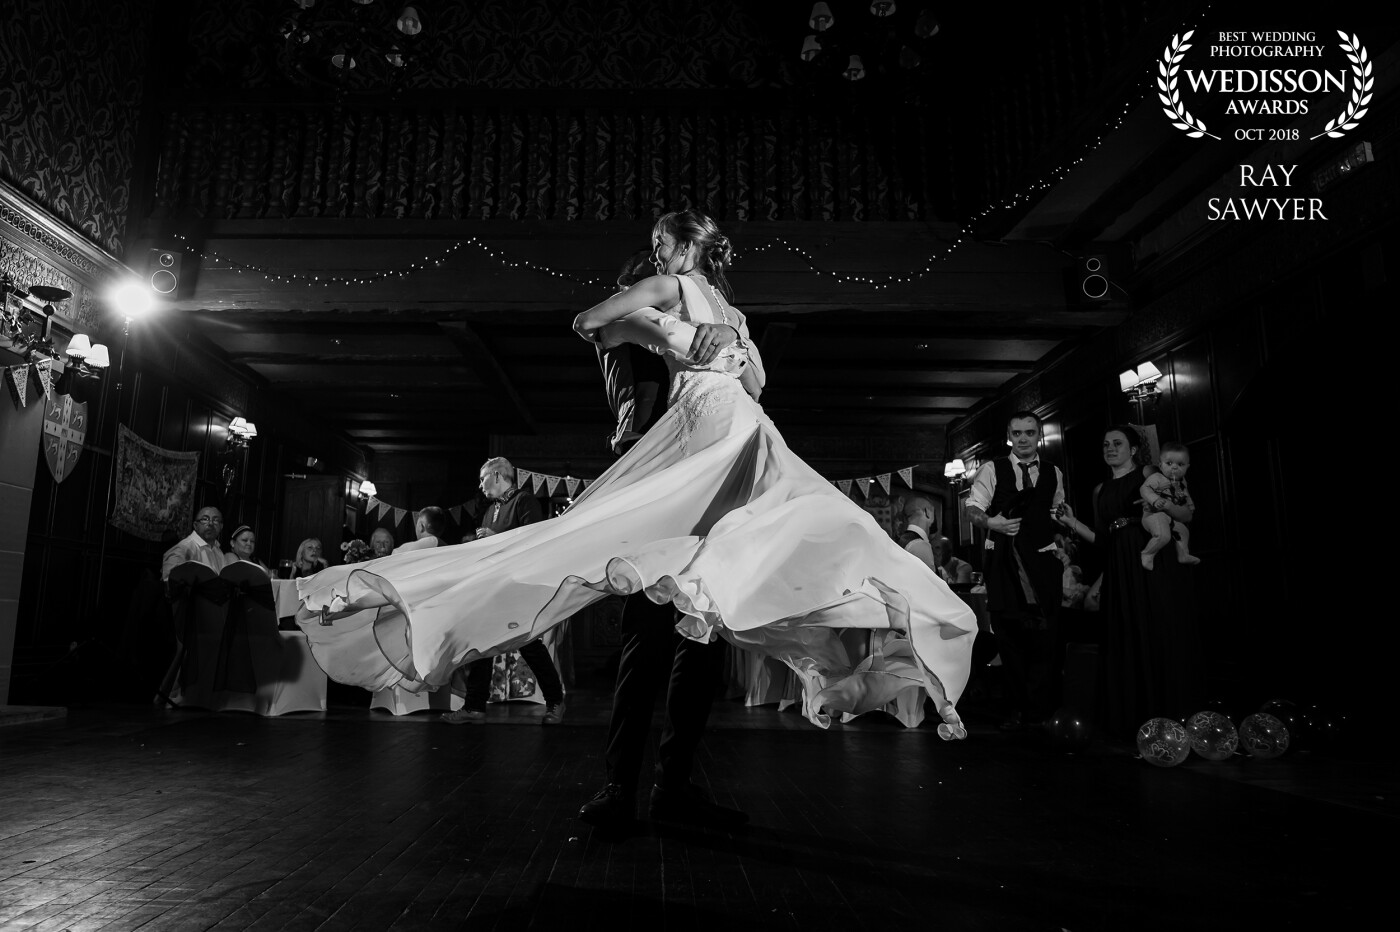 During the 1st dance the groom grabbed a hold of his wife and swung her round in the centre of the dance floor, the dress just flowed brilliantly and I froze the moment.